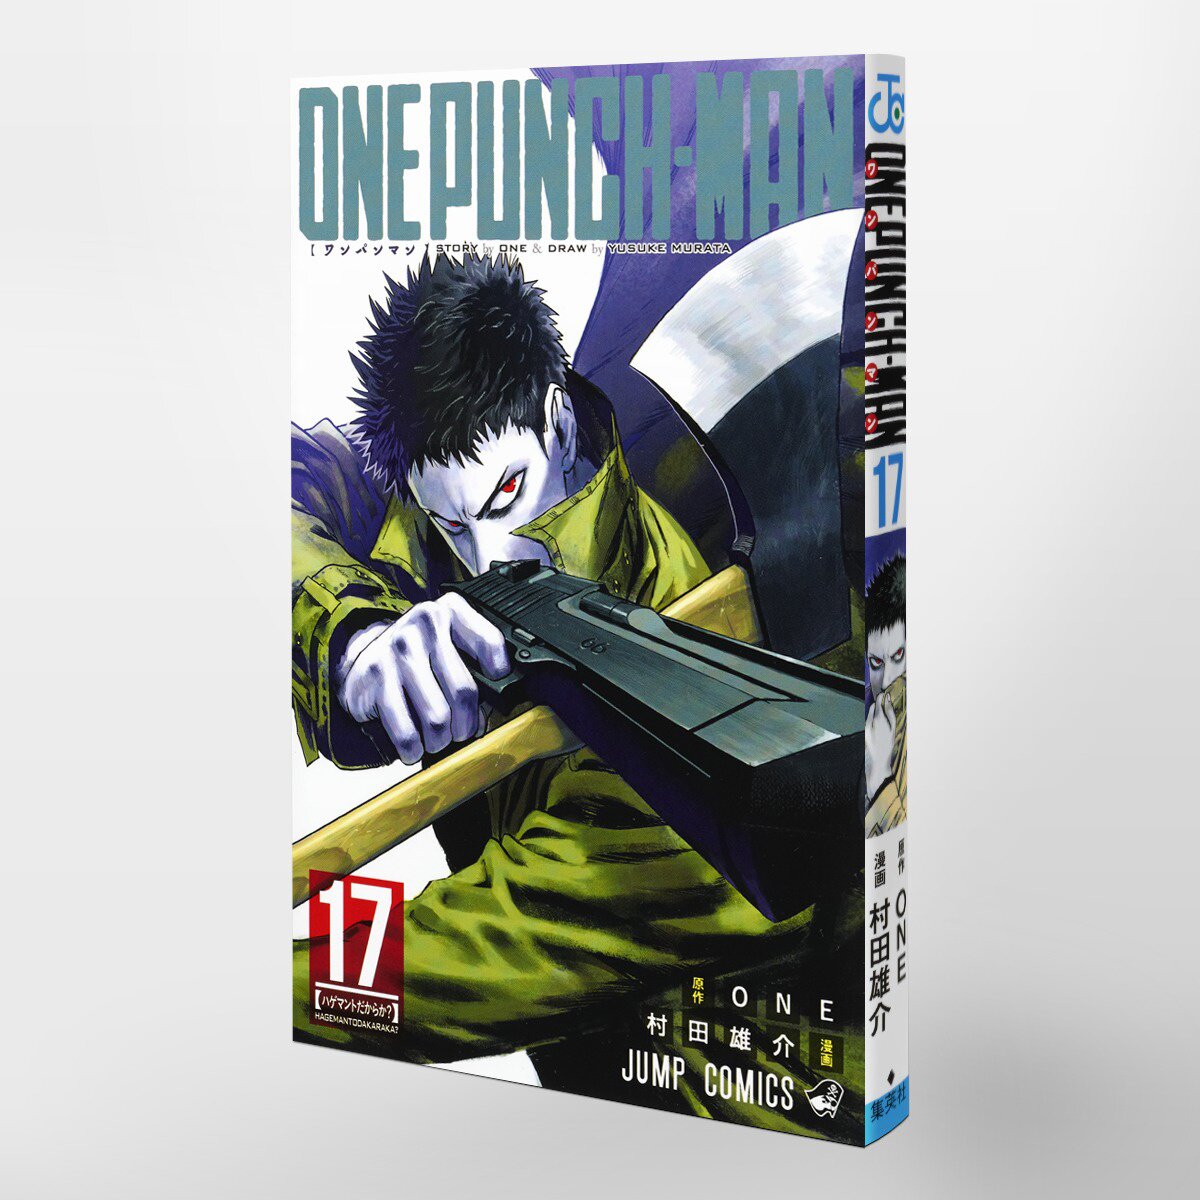 One-Punch Man, Vol. 26, Book by ONE, Yusuke Murata, Official Publisher  Page